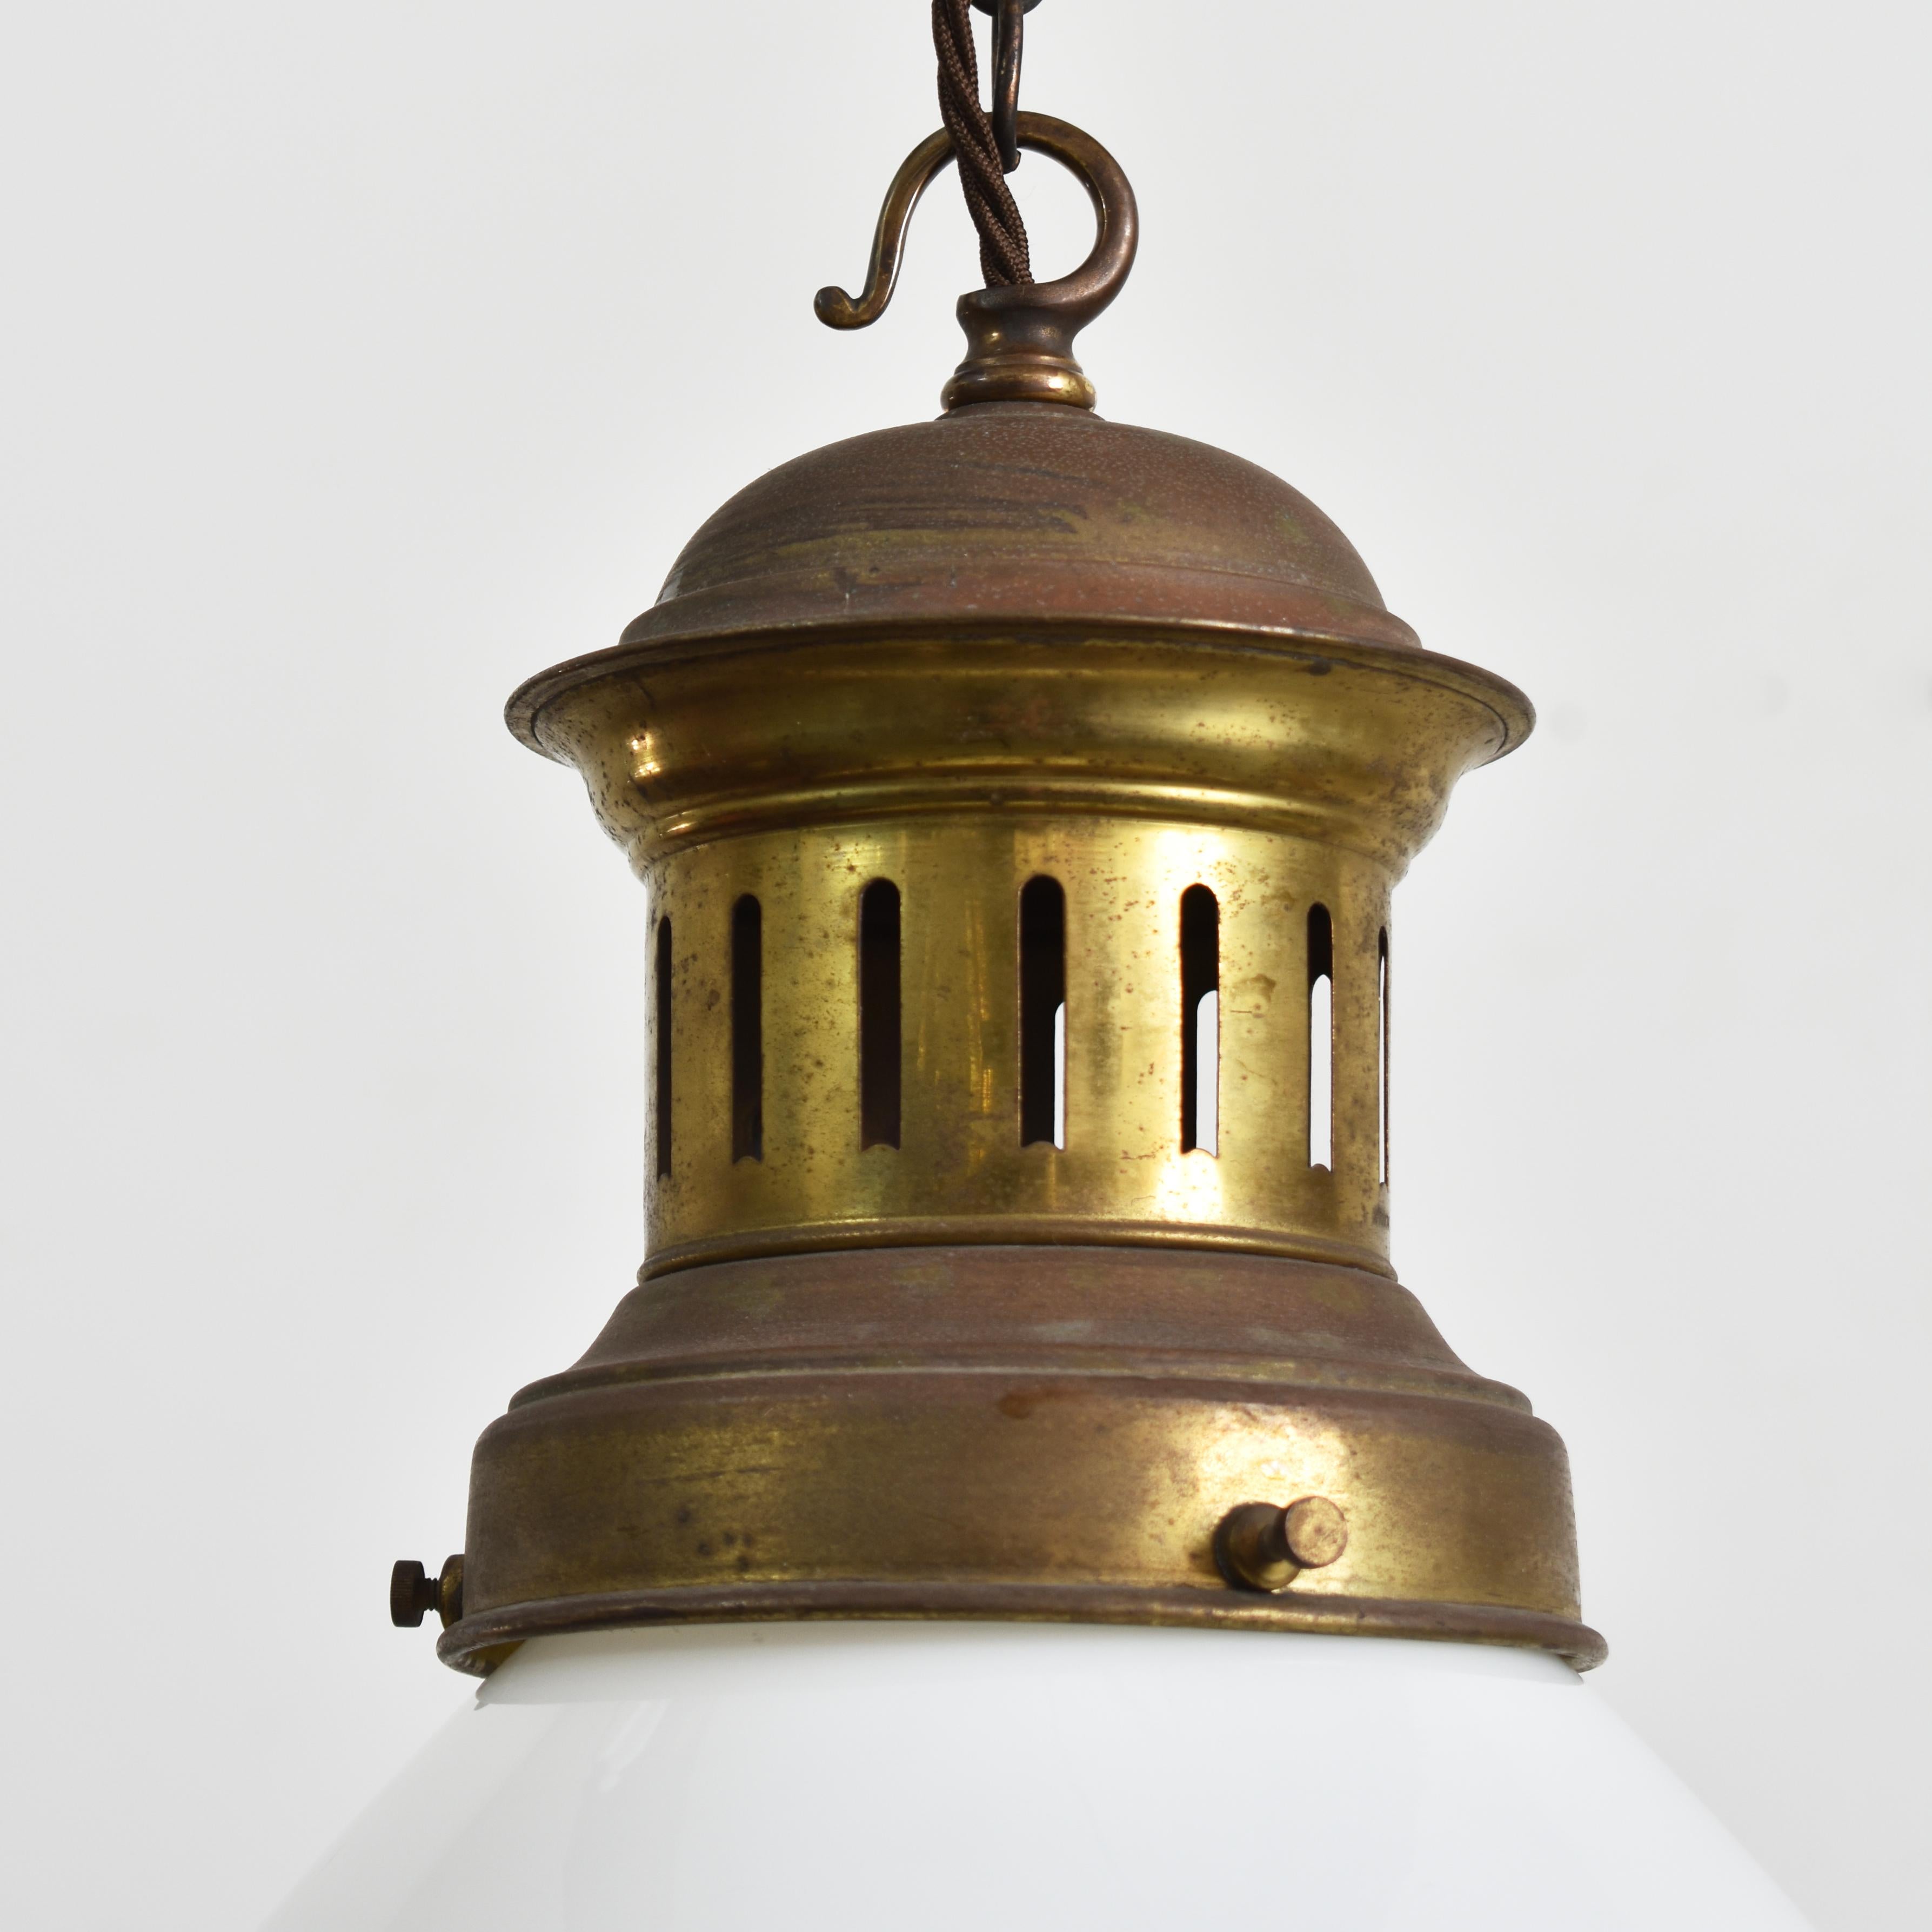 Antique Church Opaline Pendant Light – Y

An original opaline glass pendant light manufactured by GEC. The light has a milk glass opaline shade and original aged brass hanging gallery. The gallery finish has been left untouched in it original